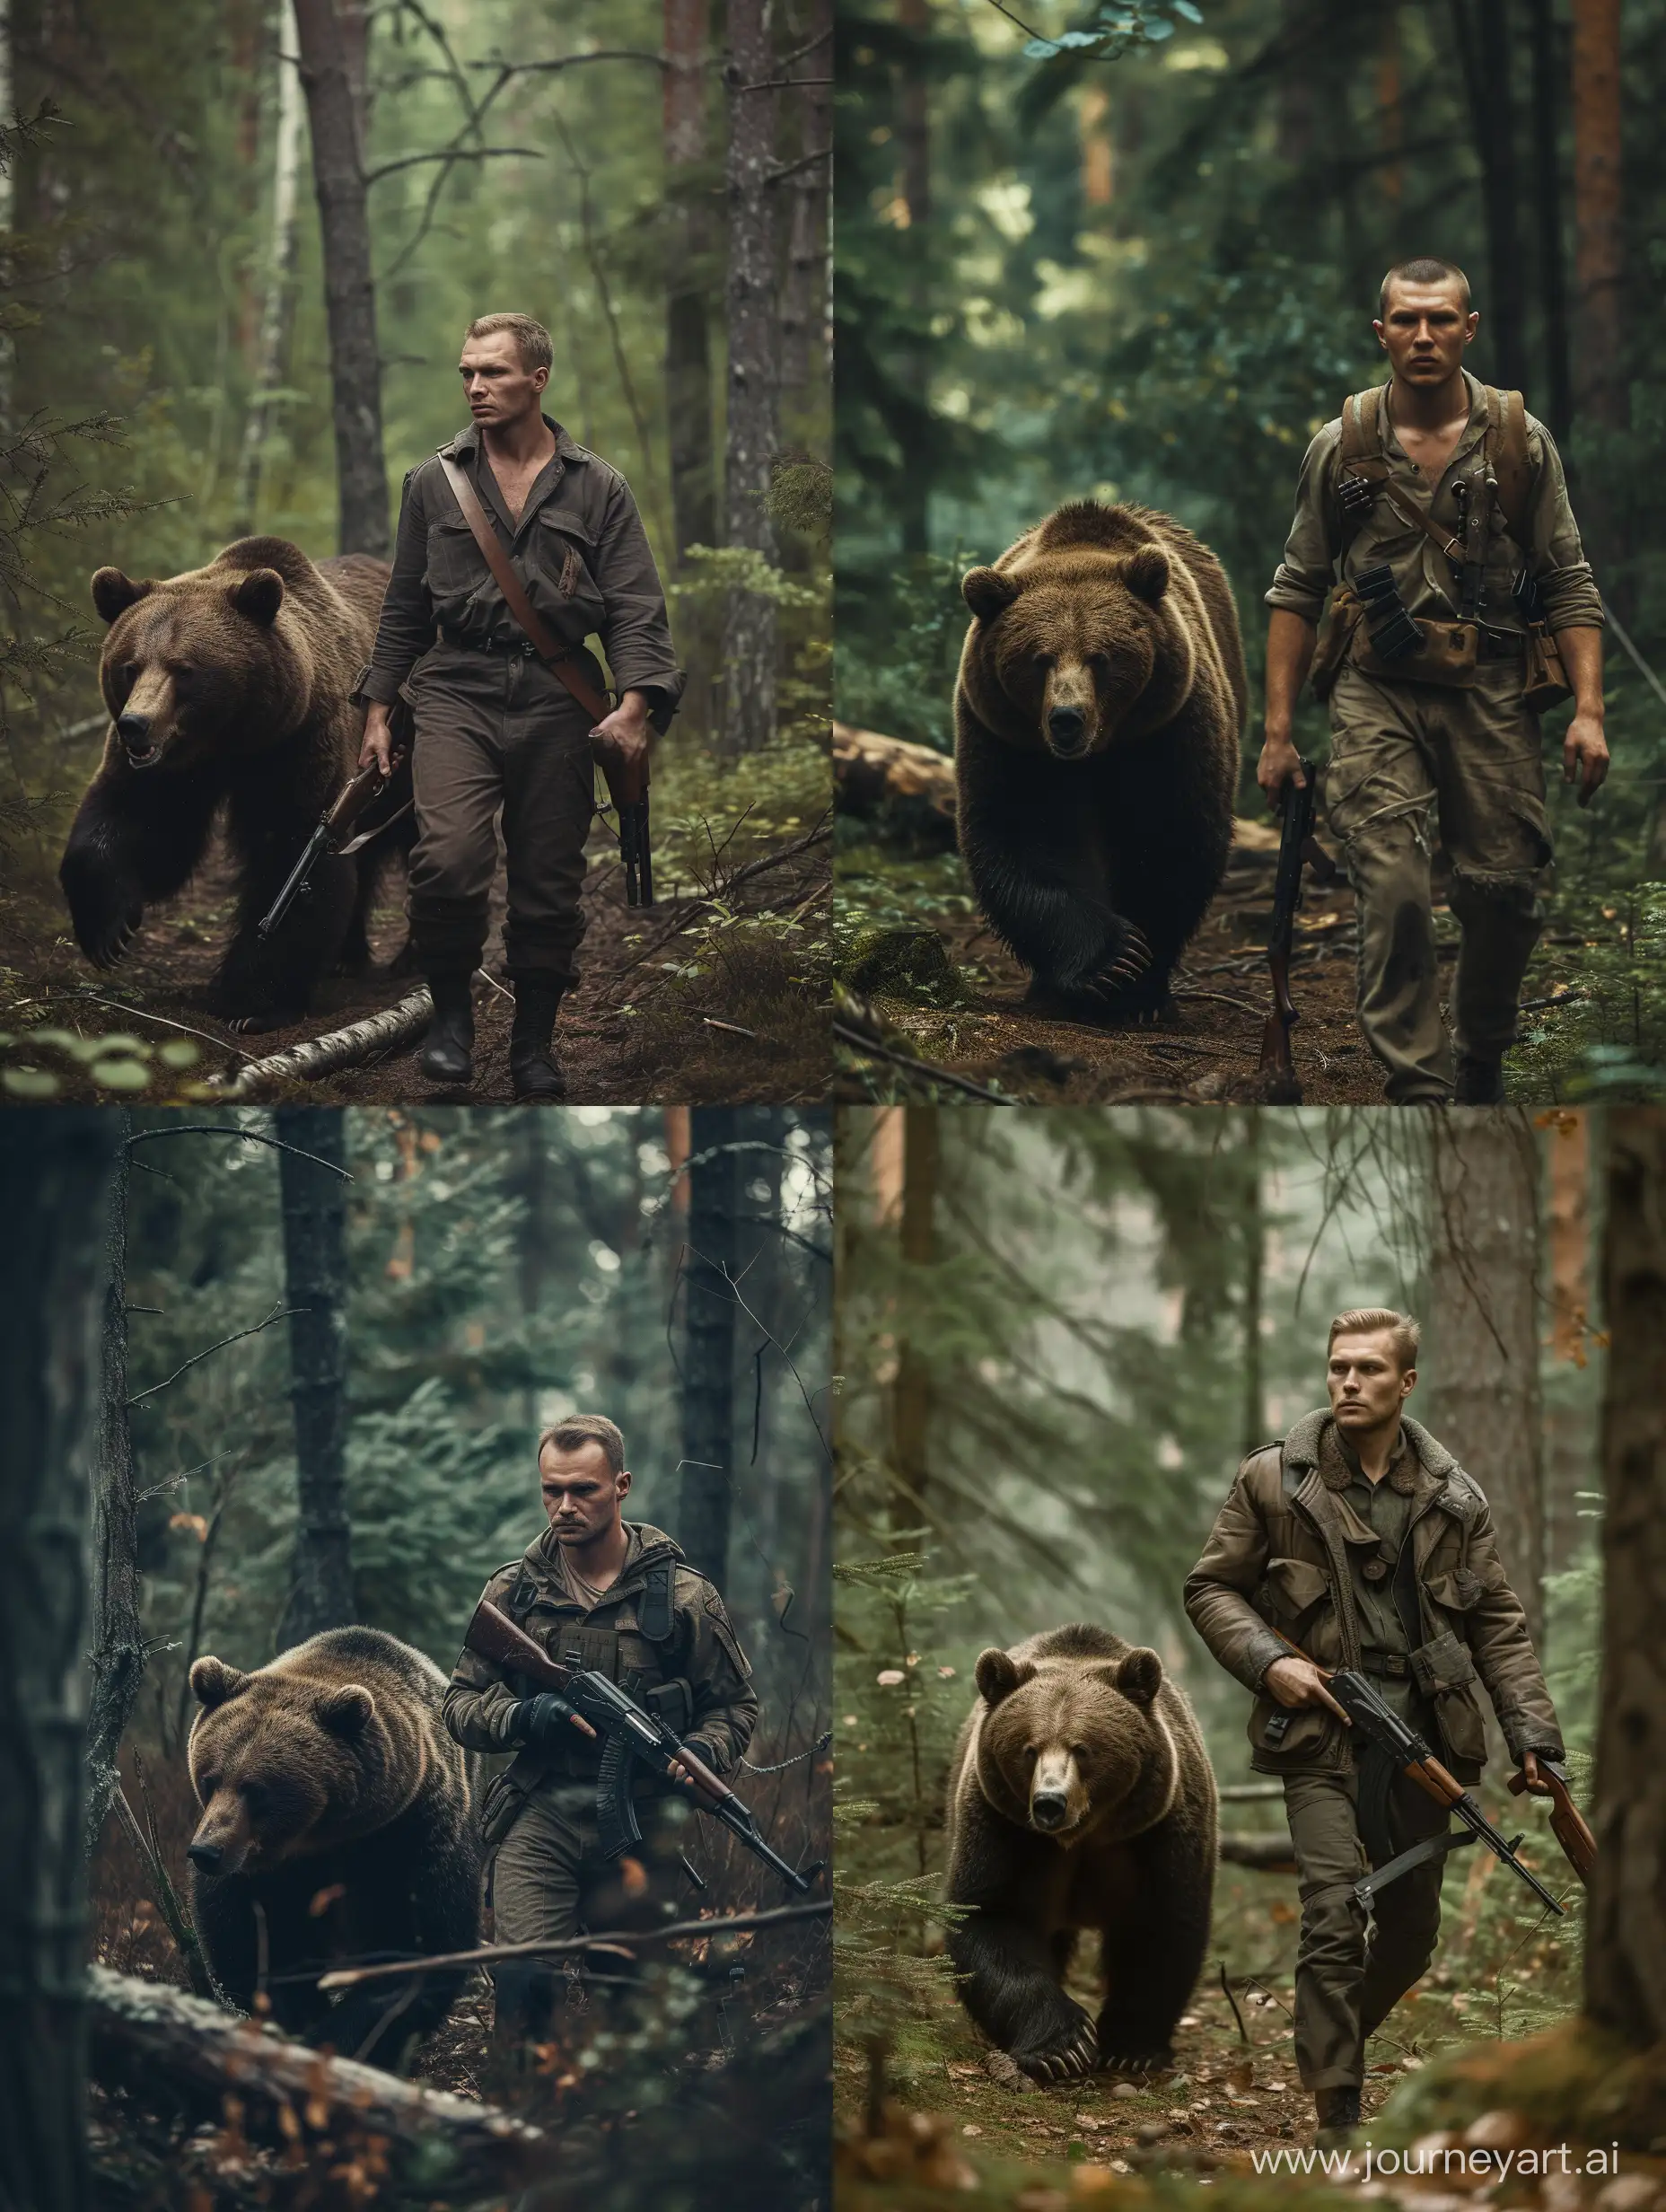 A thin Russian male hunter walks through the forest with a gun next to a bear, his face is open and looking straight, Canon EOS 6D Mark II, ISO100, 40mm, f/4,5, 2,0c